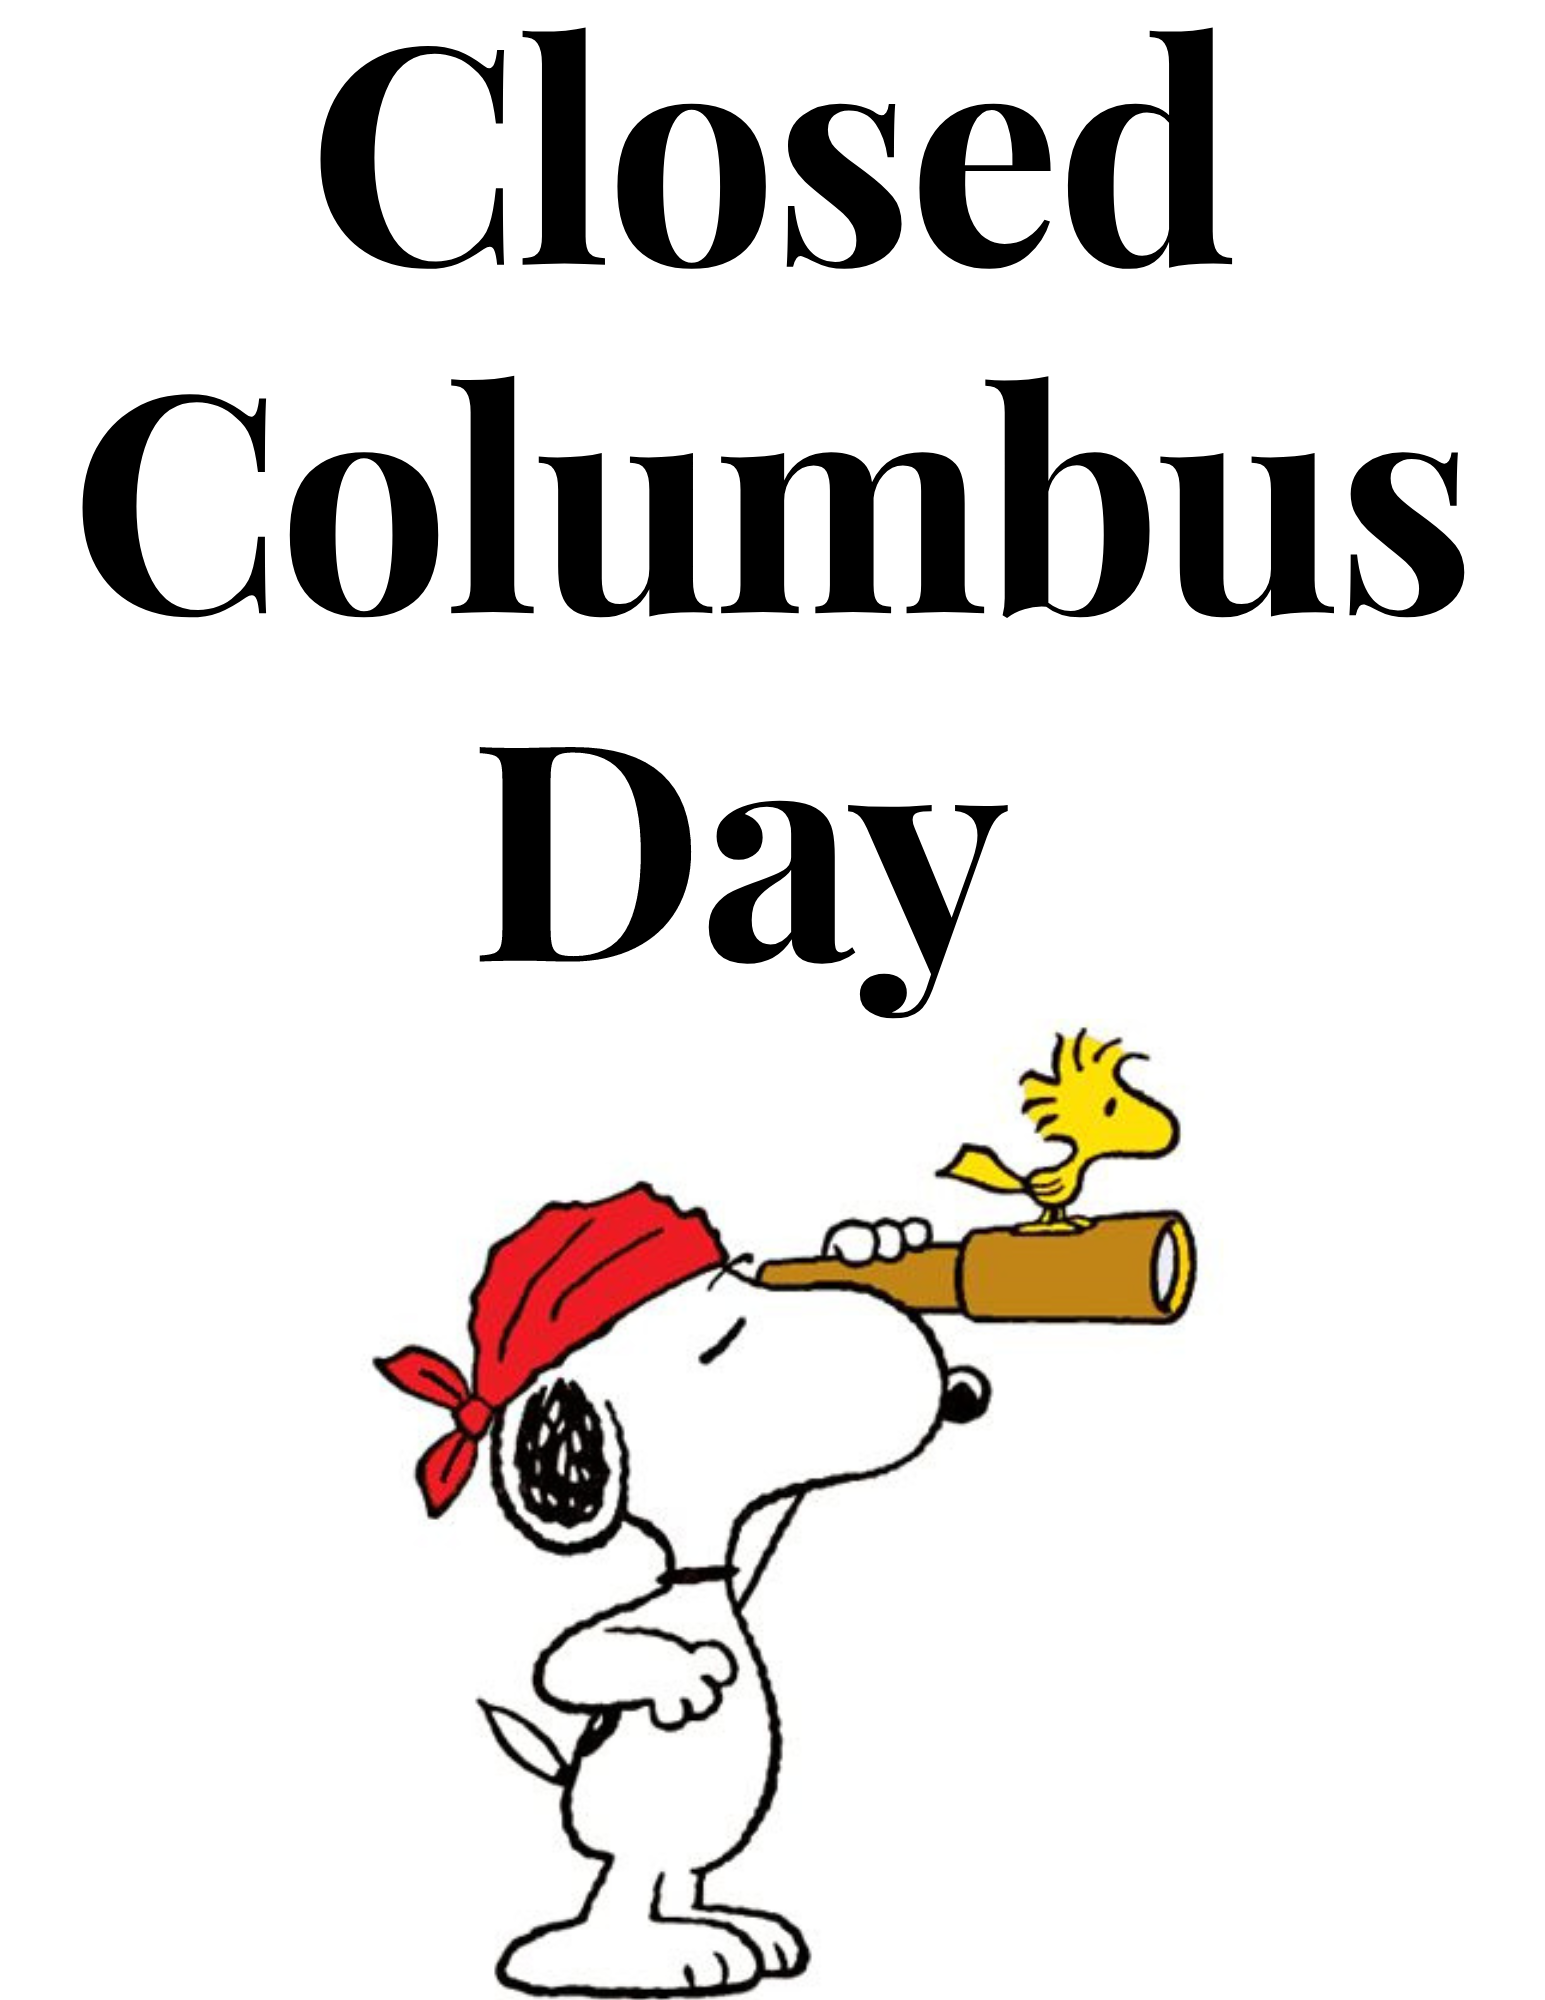 Columbus Day - Library Closed @ Mechanicville District Public Library